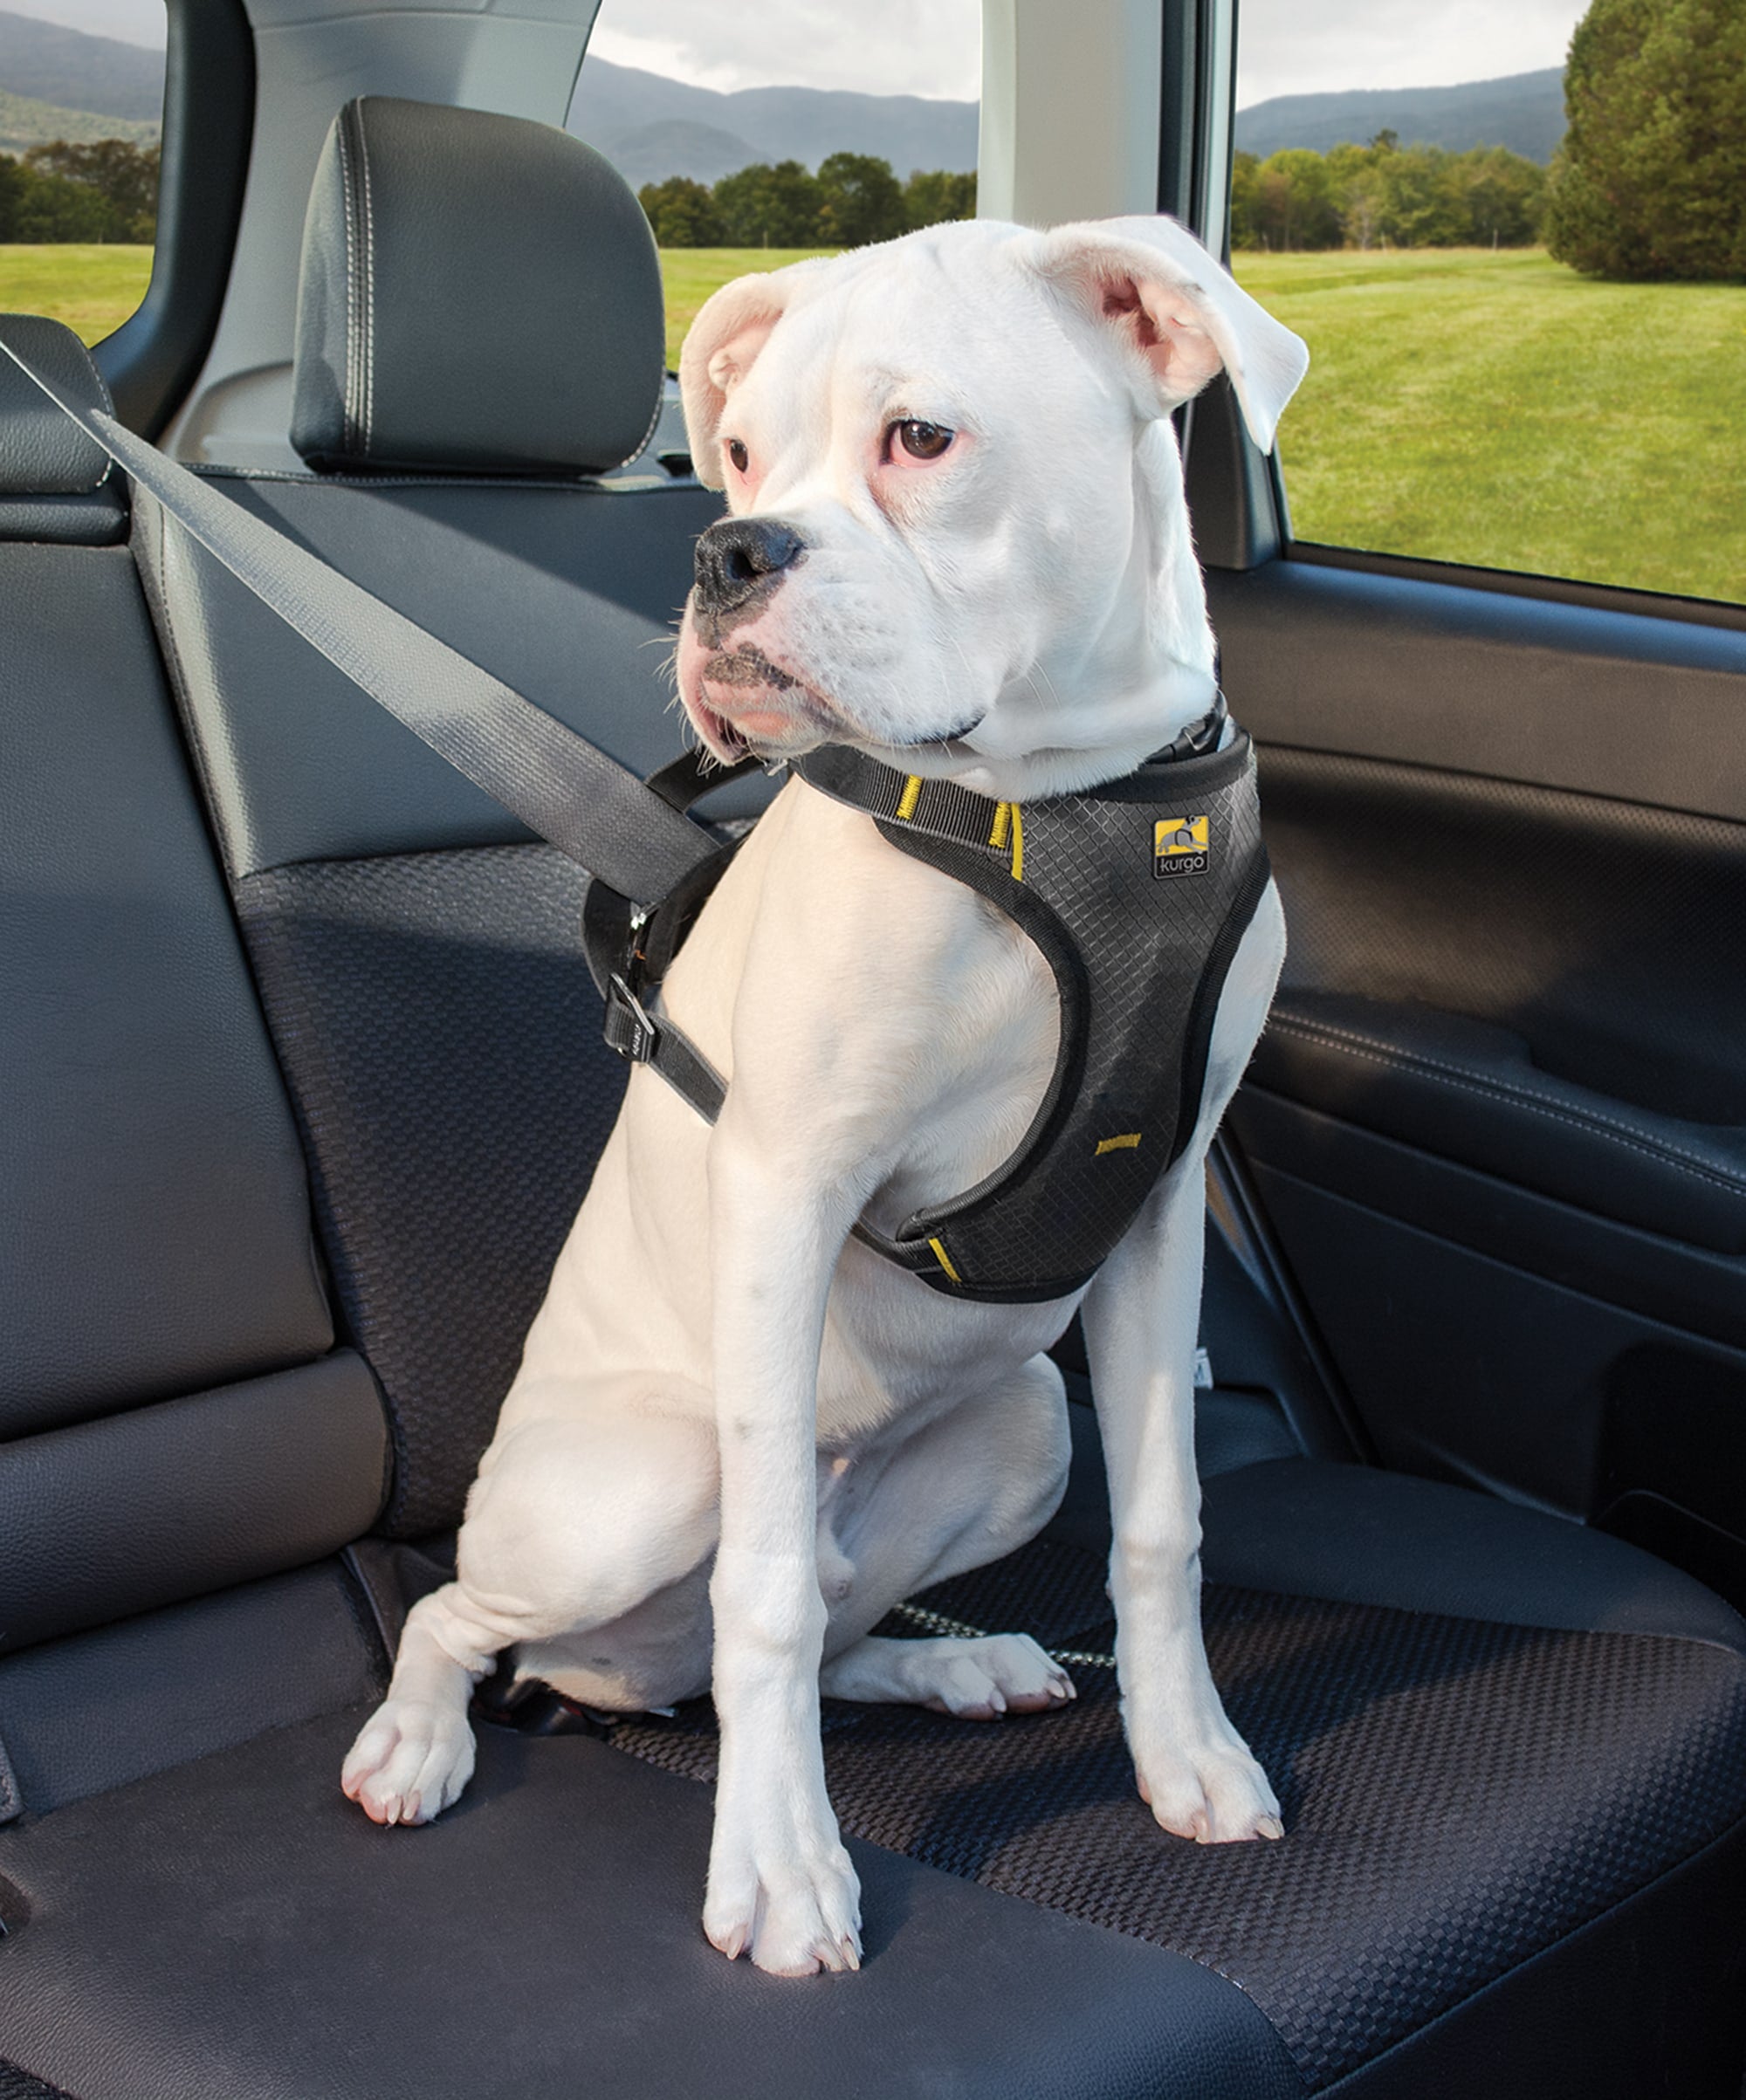 How to attach a dog harness to a seat belt